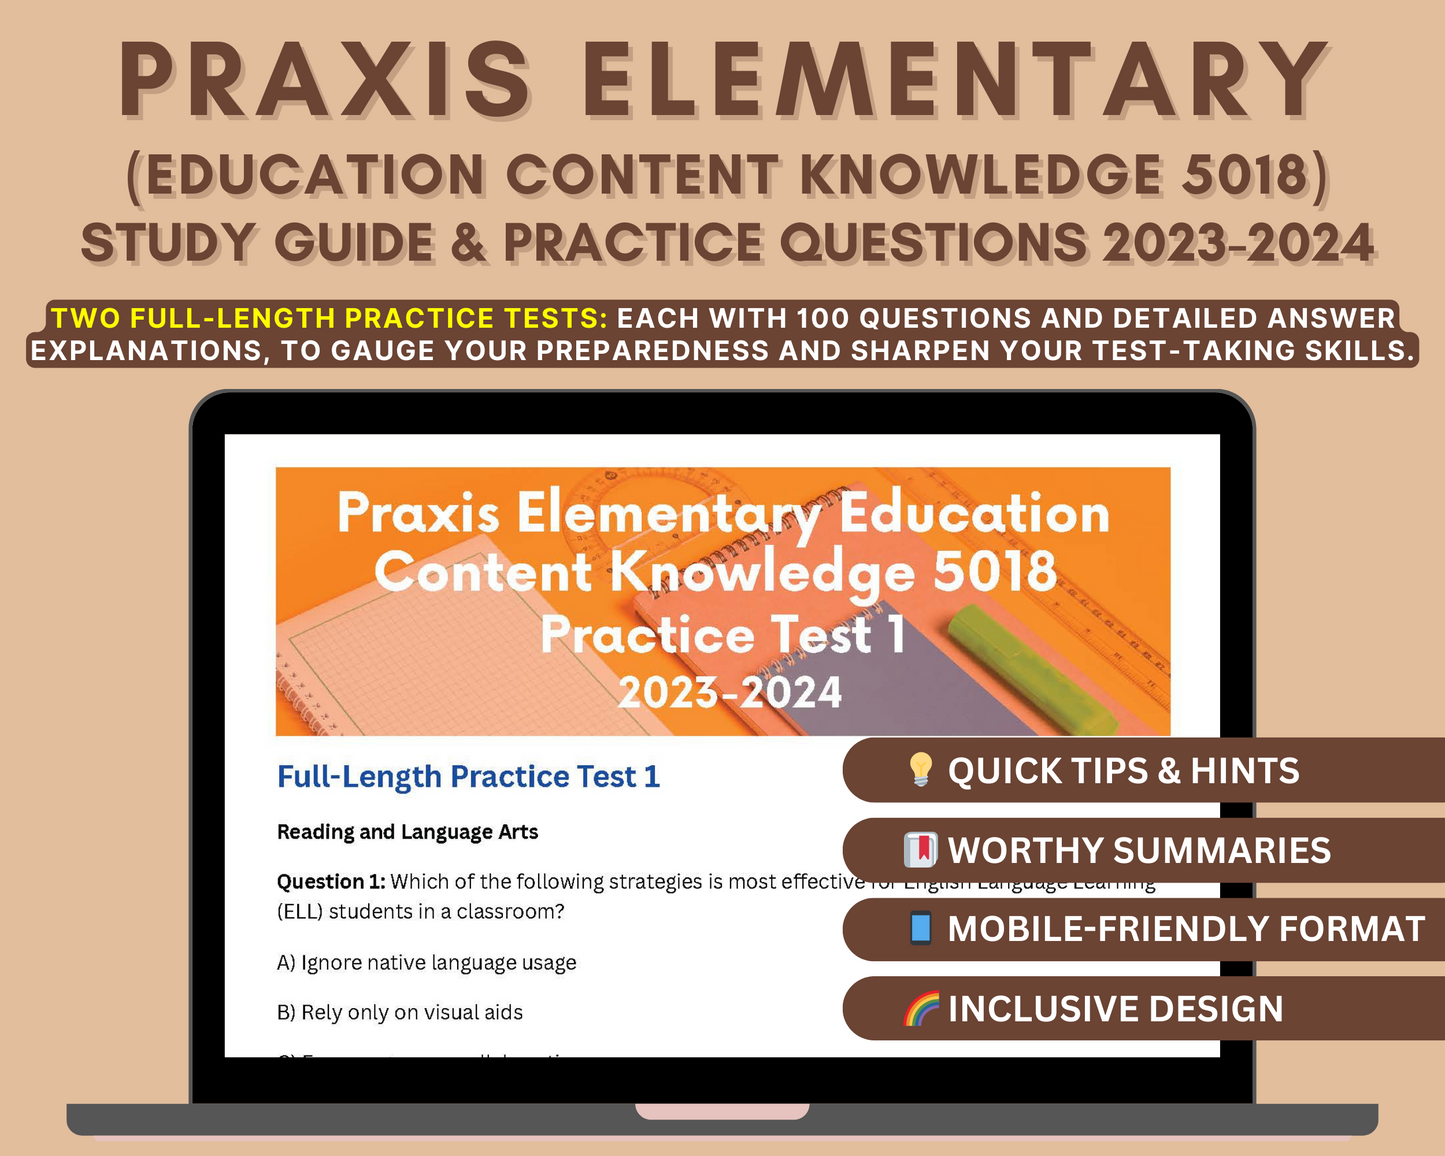 Praxis Elementary Education 5018 Study Guide 2023-2024: In-Depth Content Review, Practice Tests & Exam Tips for Teachers